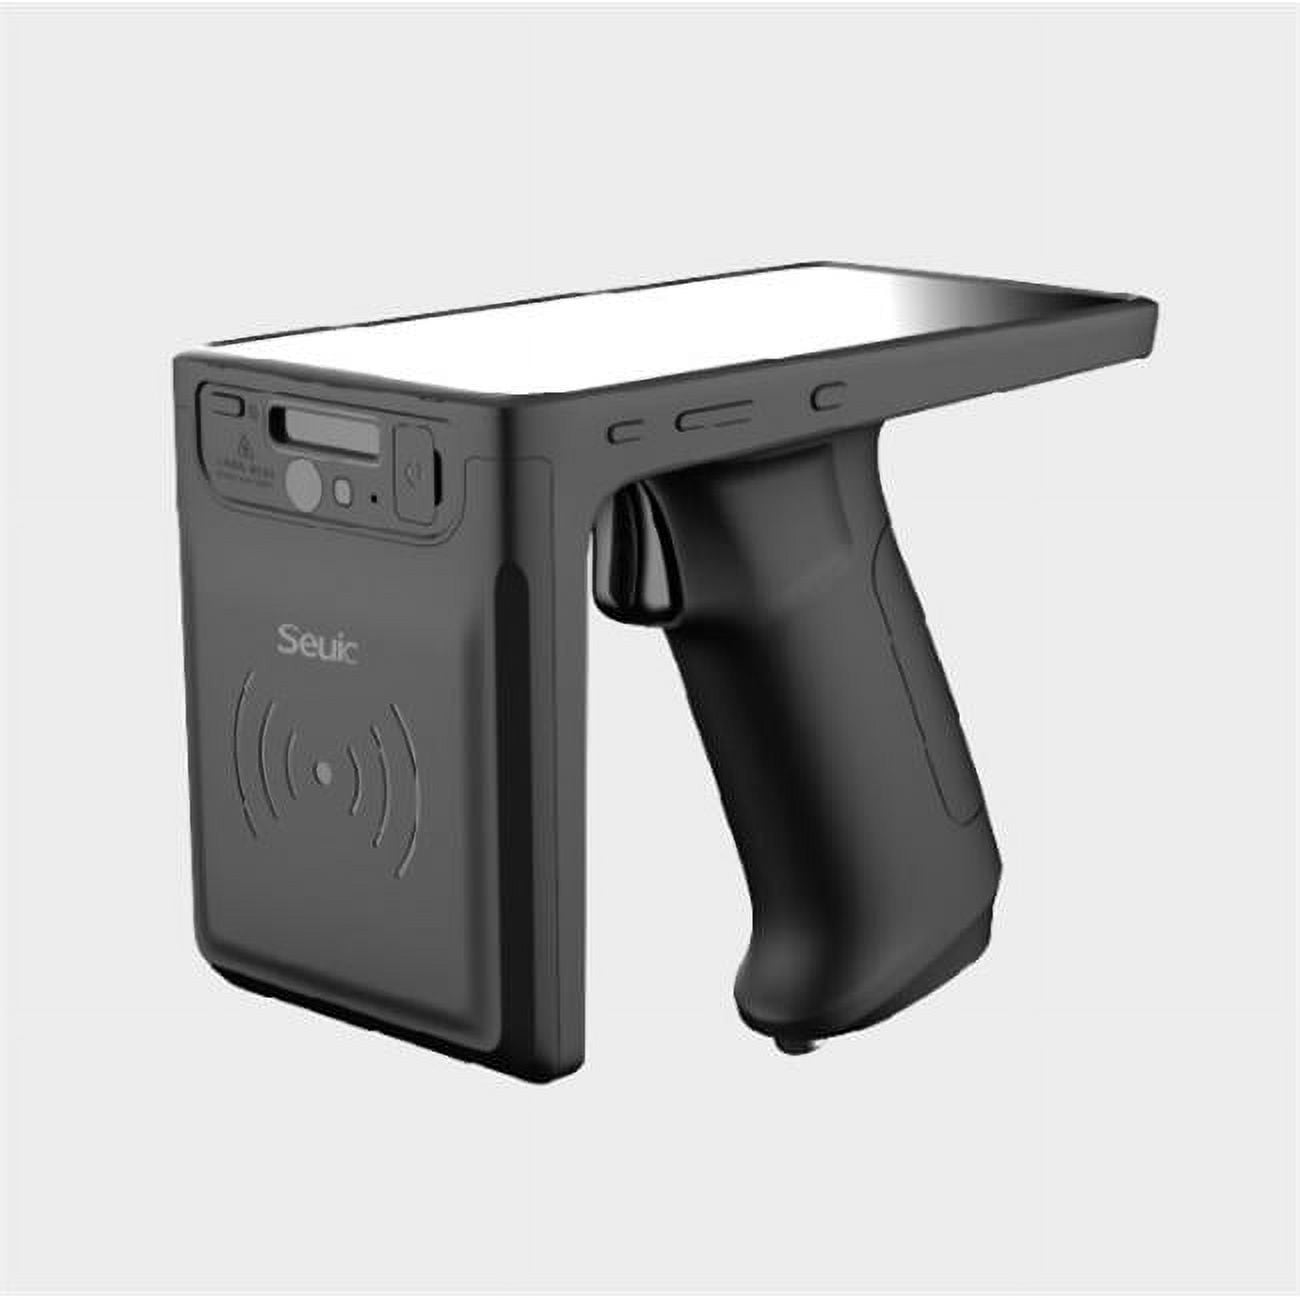 Picture of Seuic 8061003010 AUTOID UTouch Cortex-A53 4 GB & 64 GB Android 9.0 RFID Reader